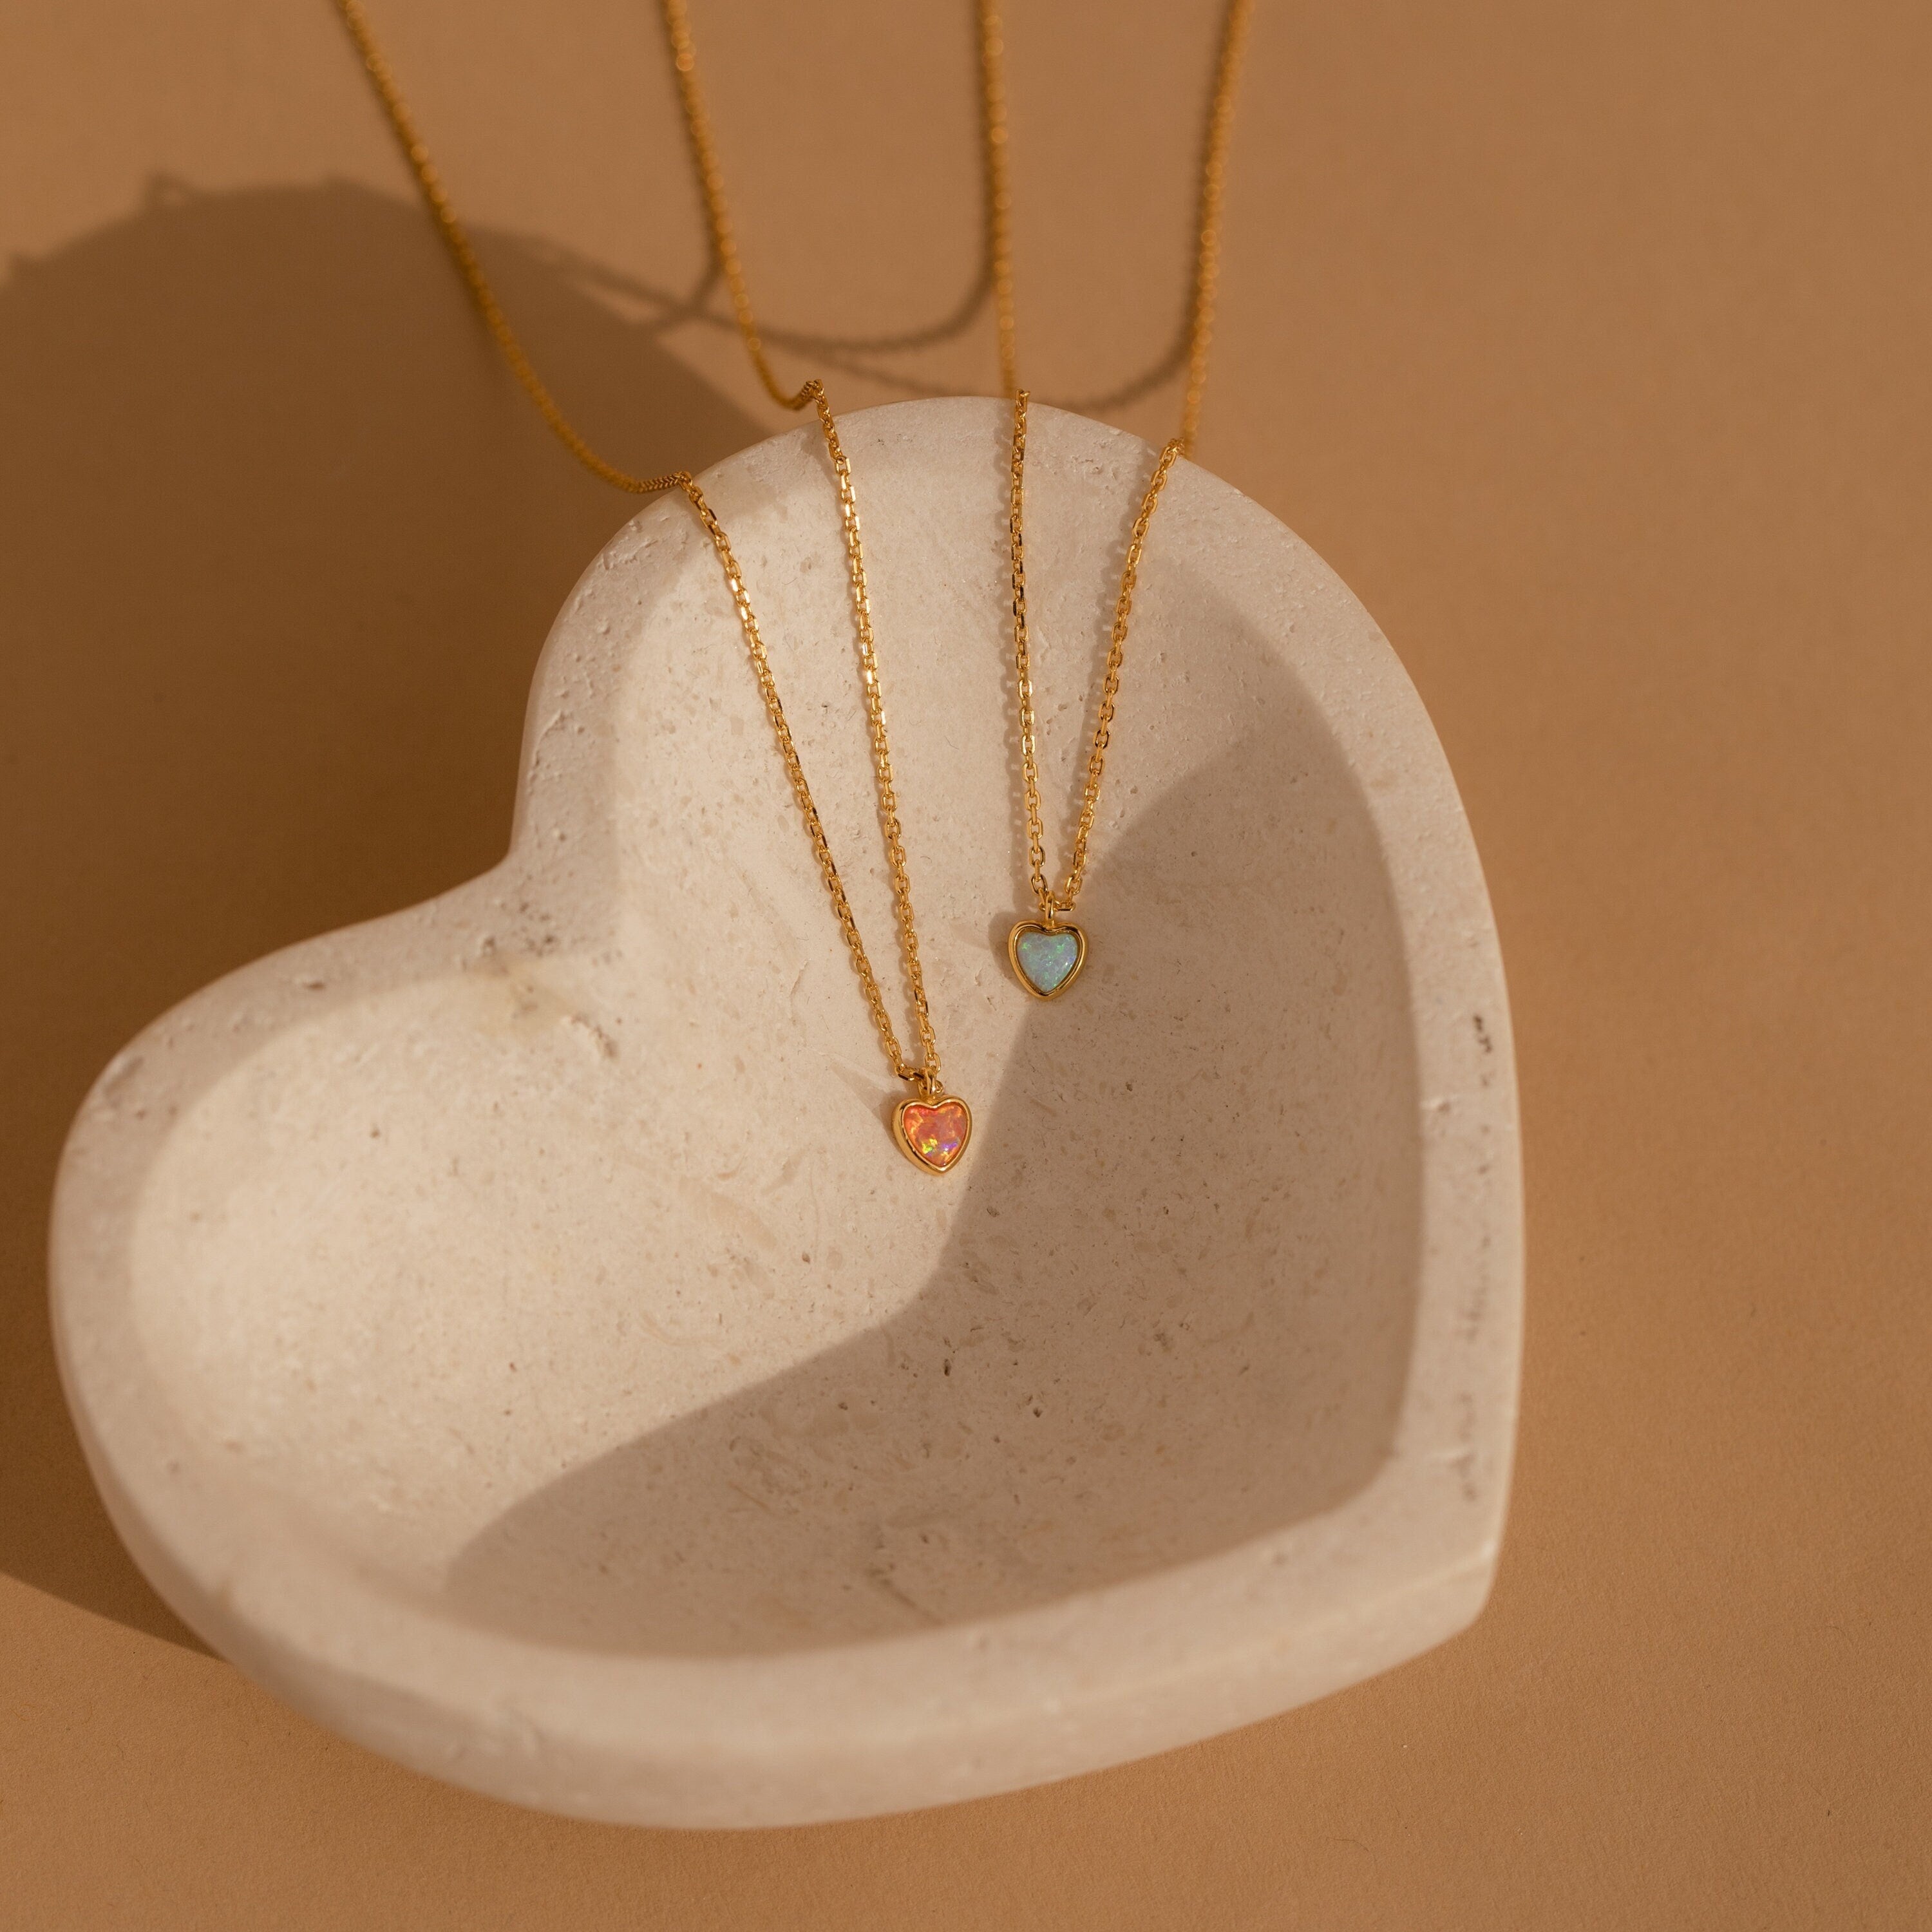 Pink Opal Heart Necklace